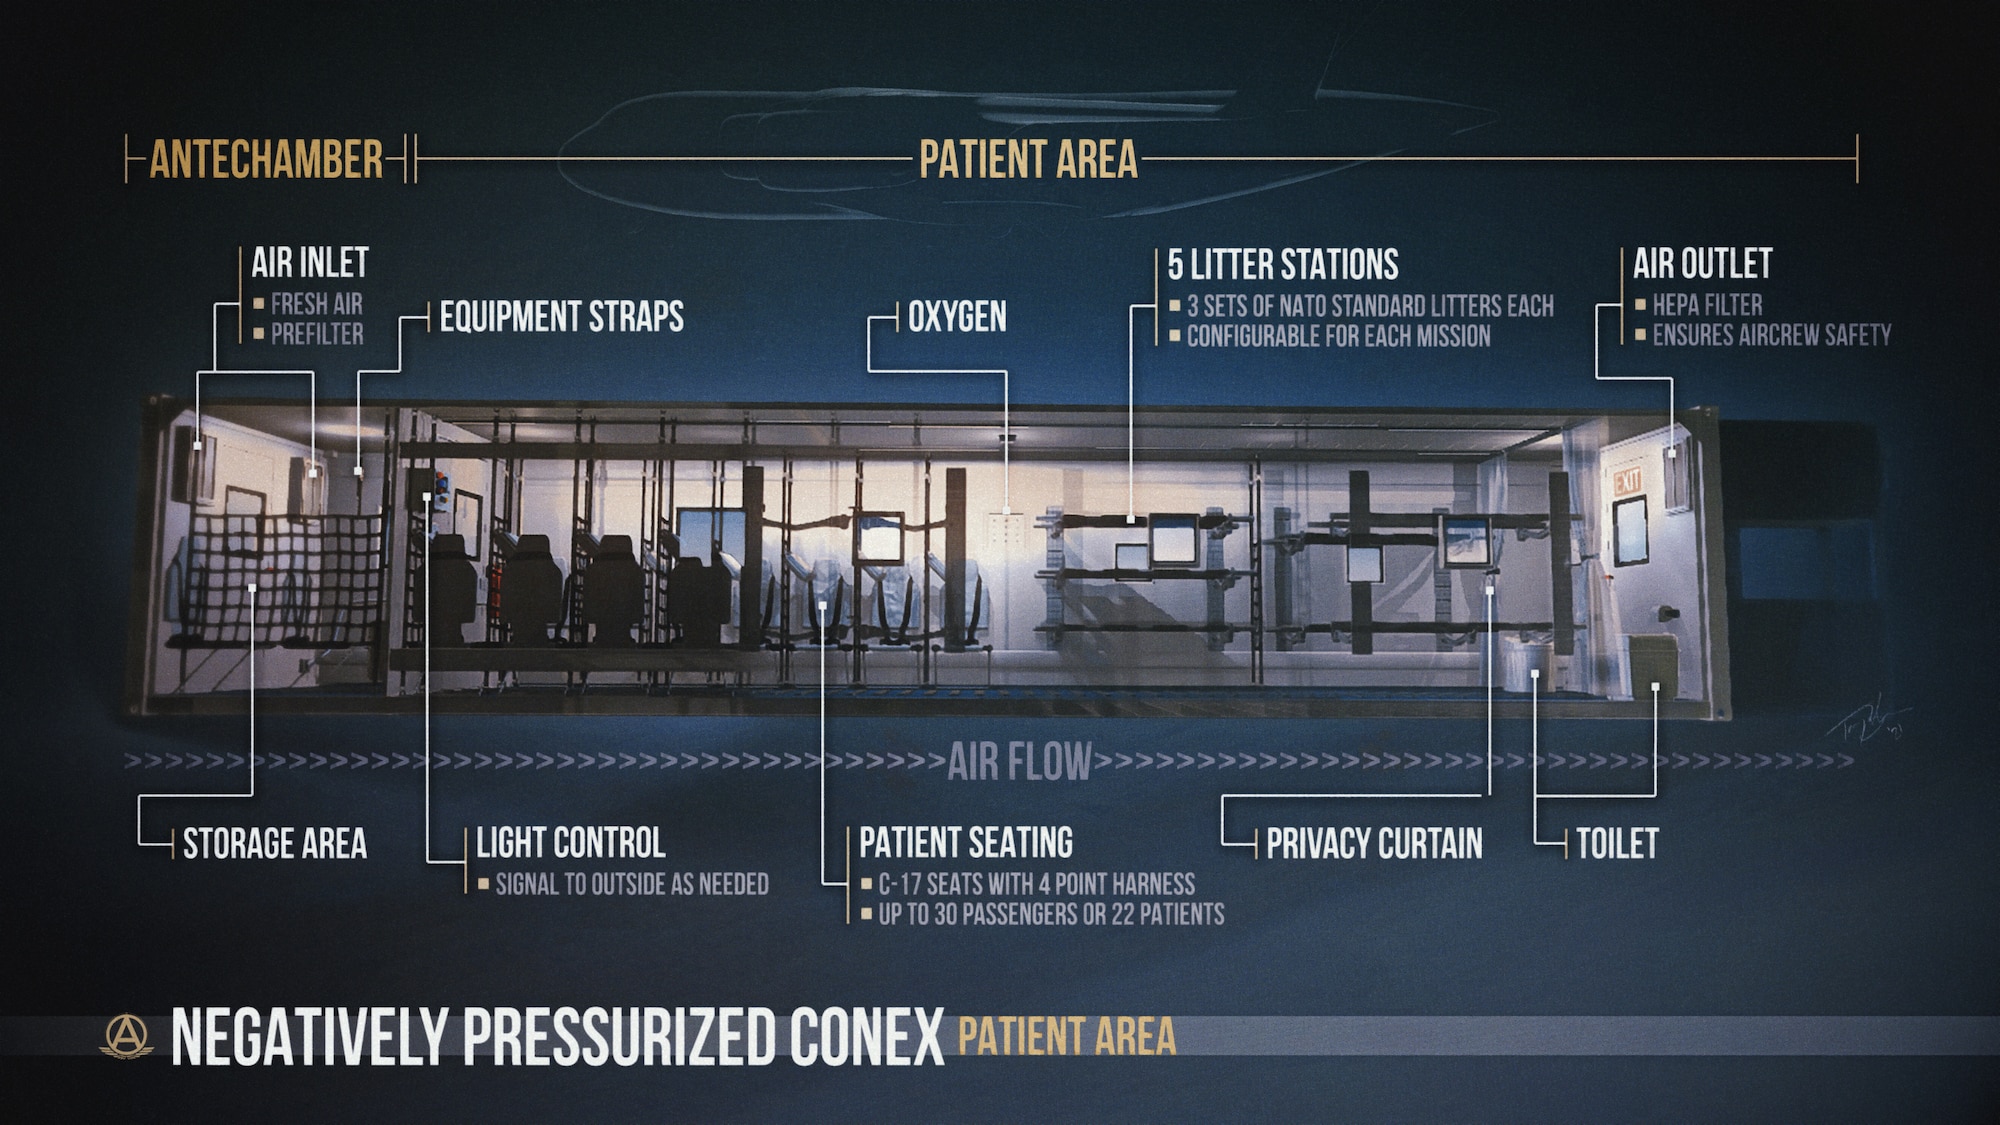 Graphic depicting the main patient area of the NPC.